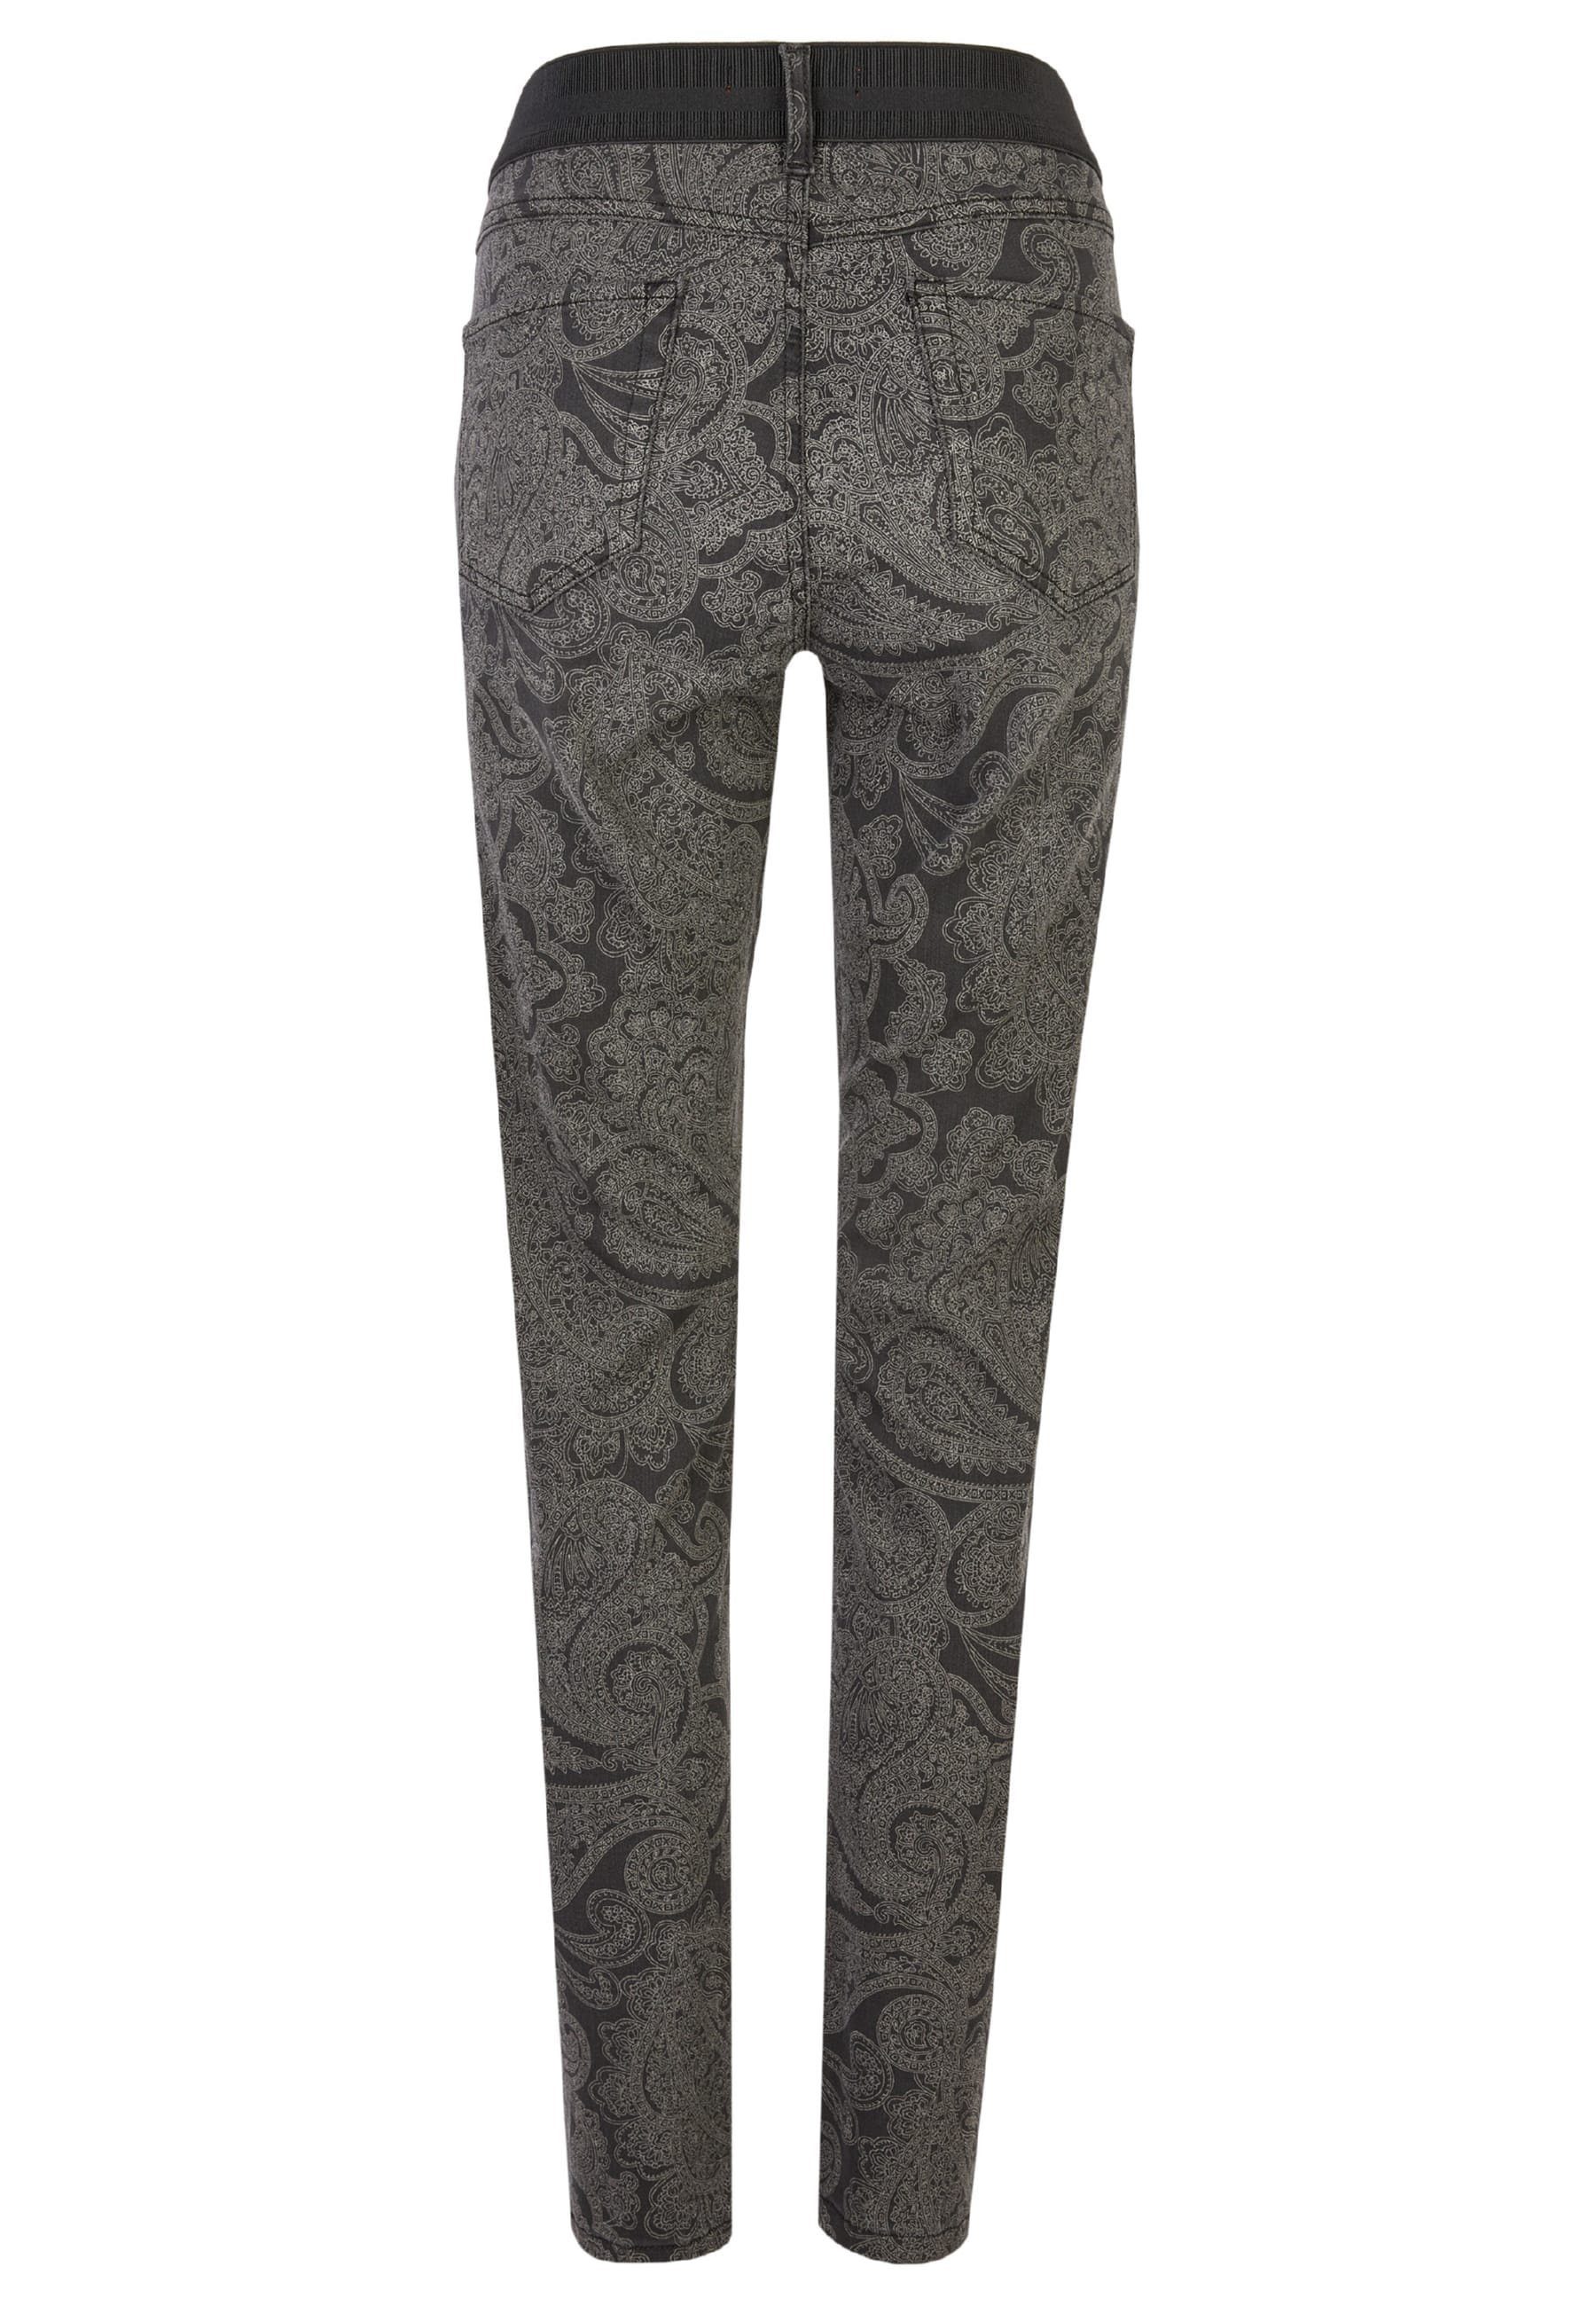 Jeans anthrazit Slim-fit-Jeans mit Label-Applikationen Size mit One ANGELS Paisley-Muster